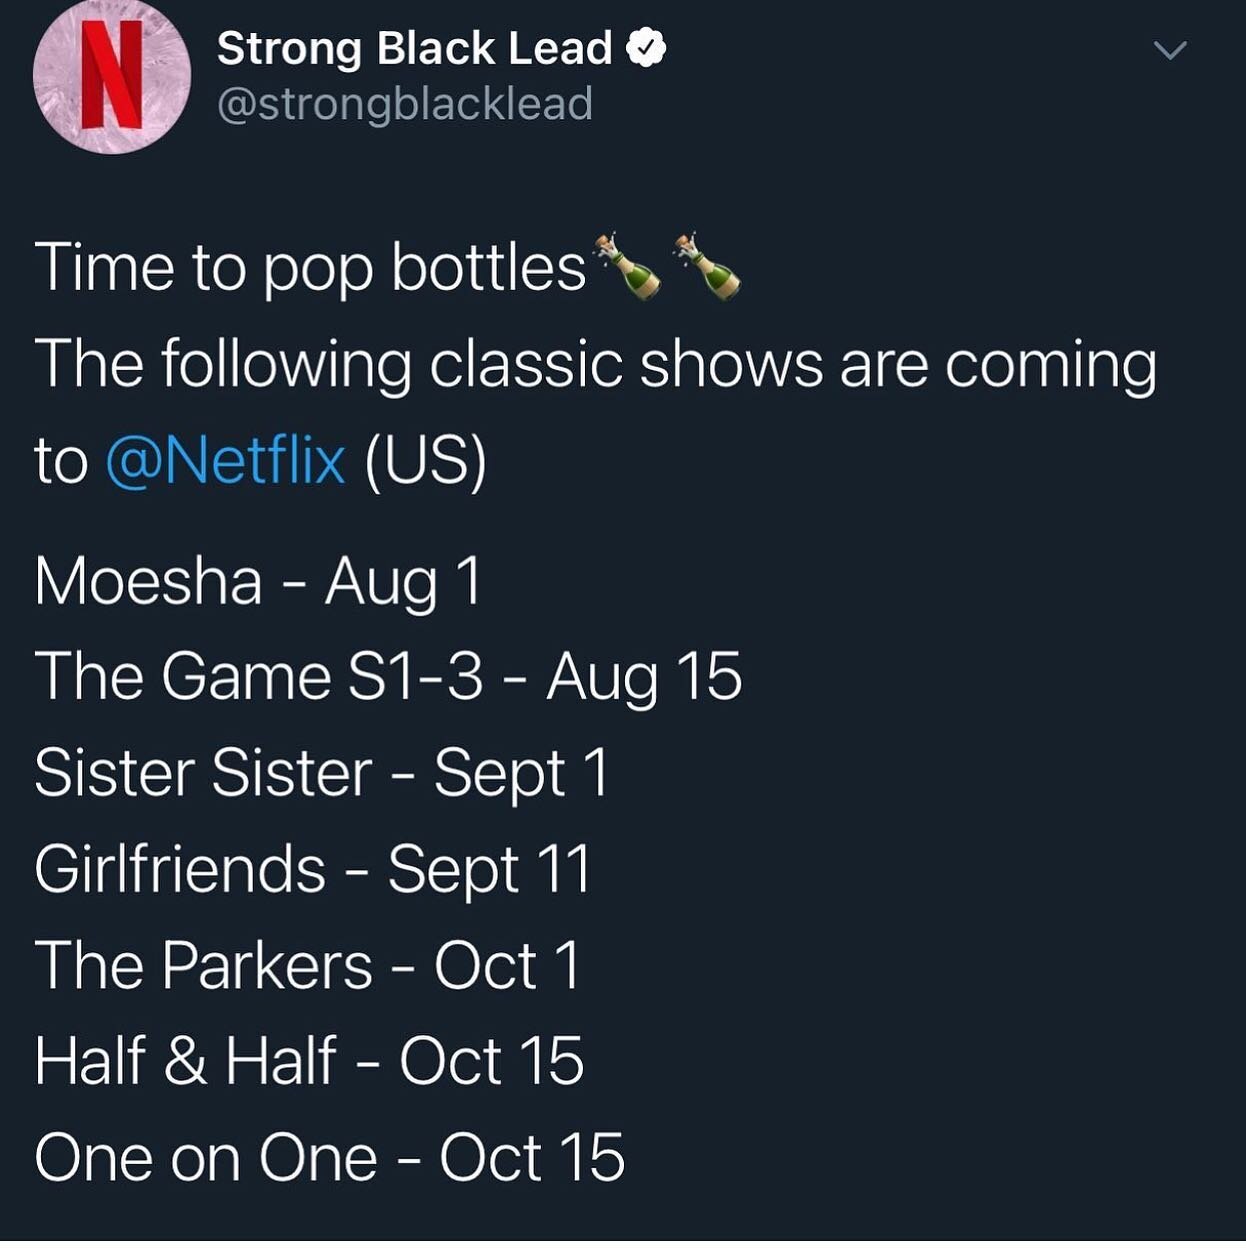 The joy that has jus filled inside of me haha What are you most excited to watch? Def Moesha for me. Omg 🤣 I remember recording every episode on VHS bc I was a HUGE Brandy fan. Her album was the first one I ever purchased. Took all my allowance....I